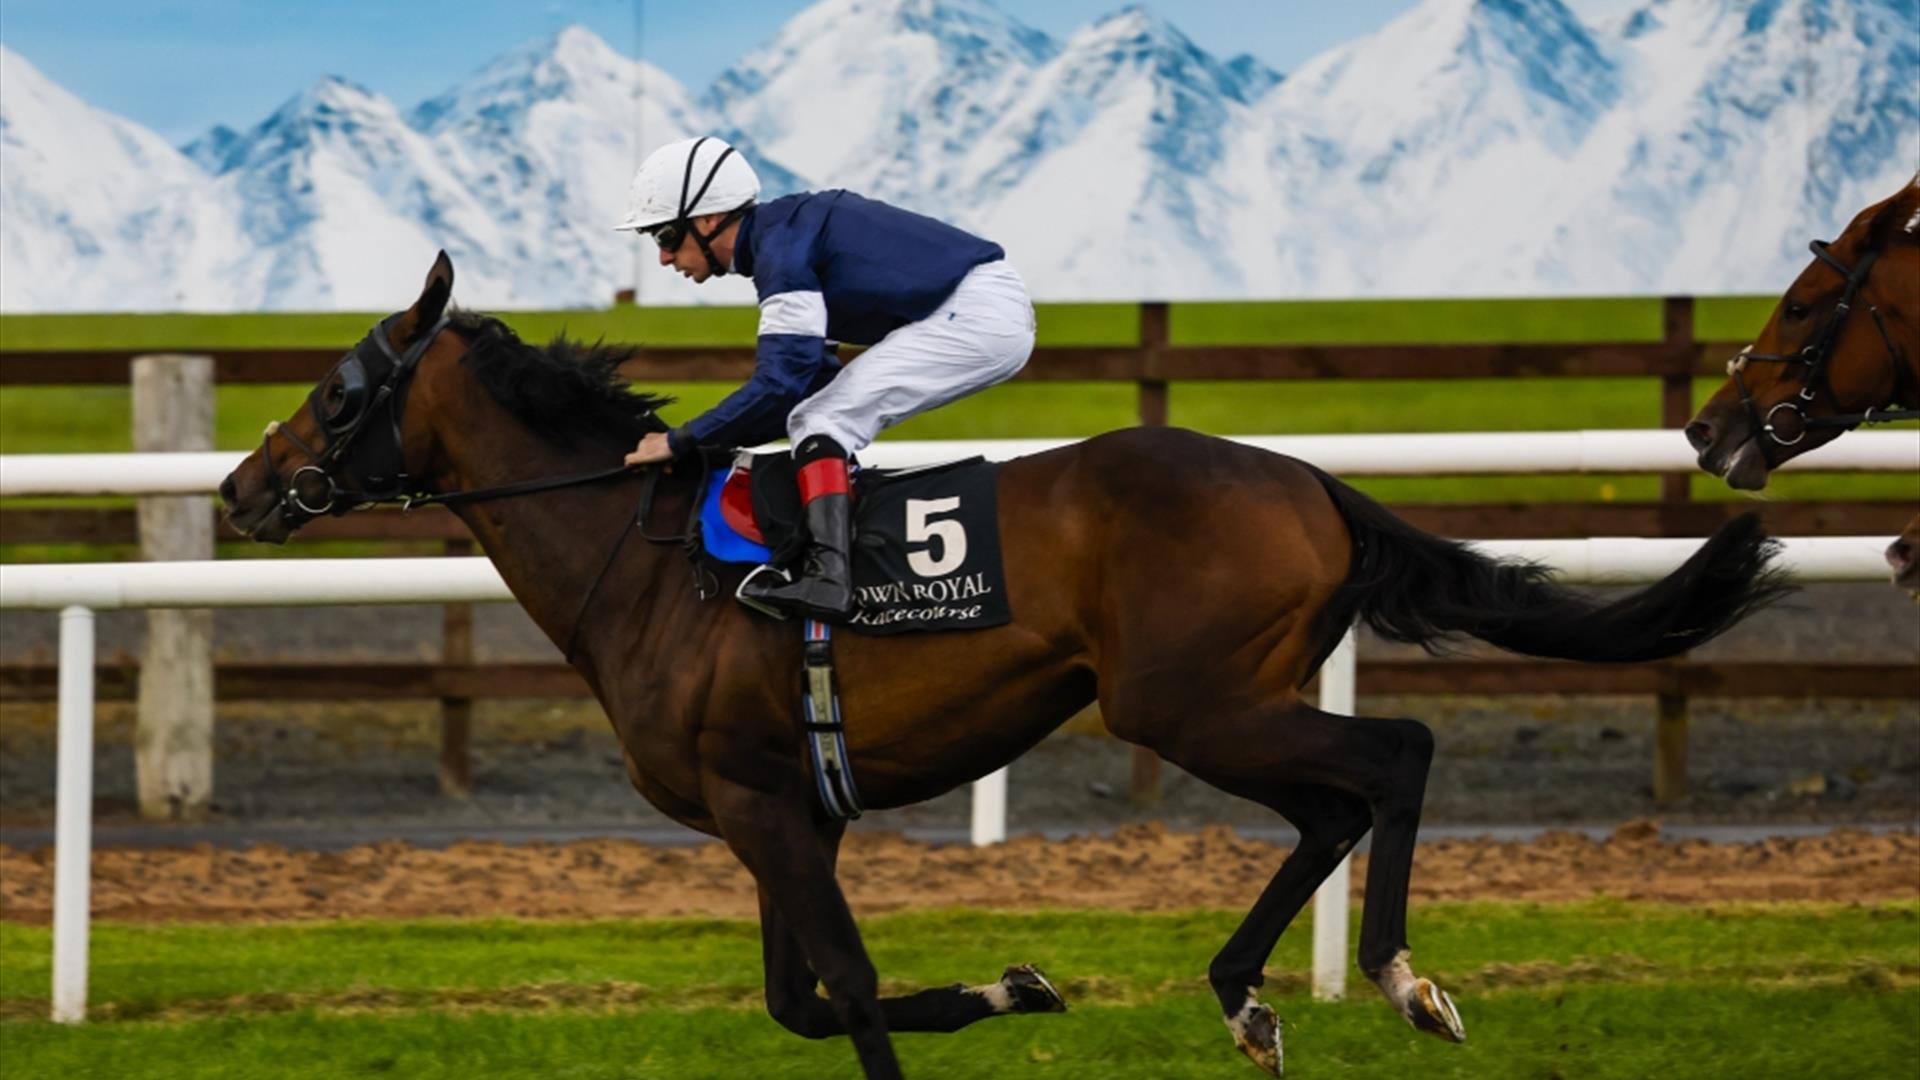 Jockey wearing navy and white on horse with snow capped mountains in the background